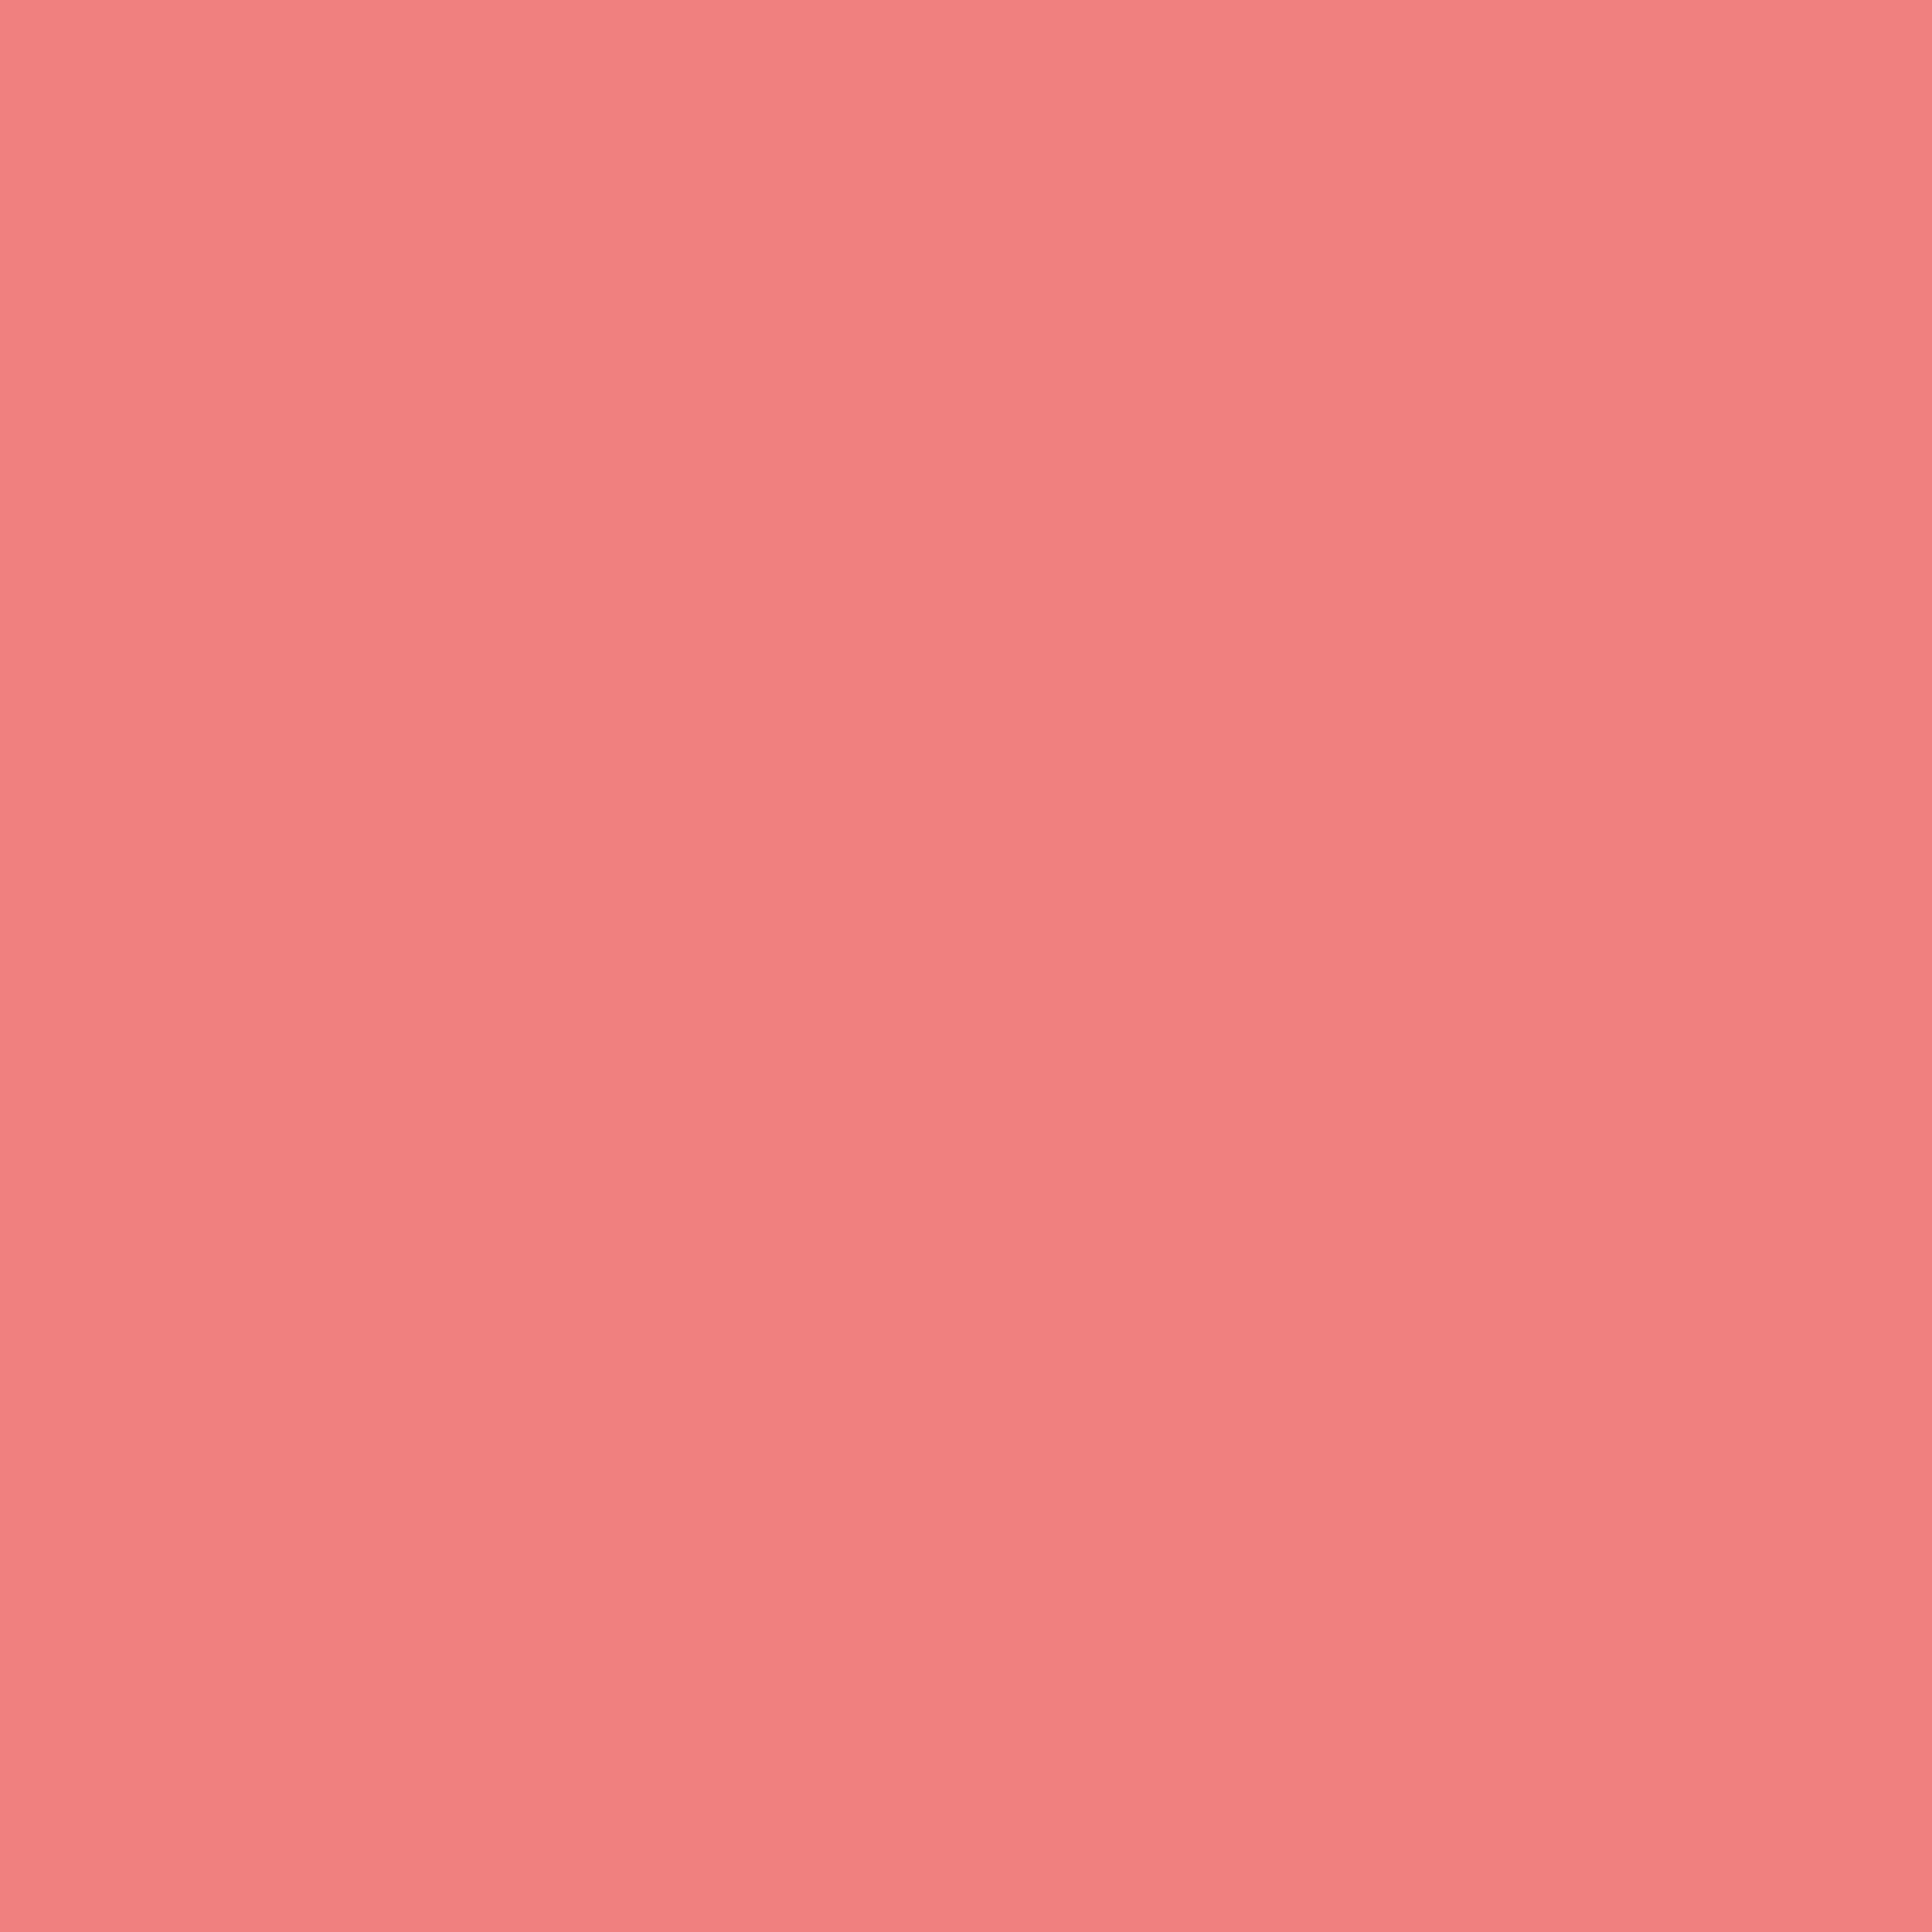 2048x2048 Light Coral Solid Color Background